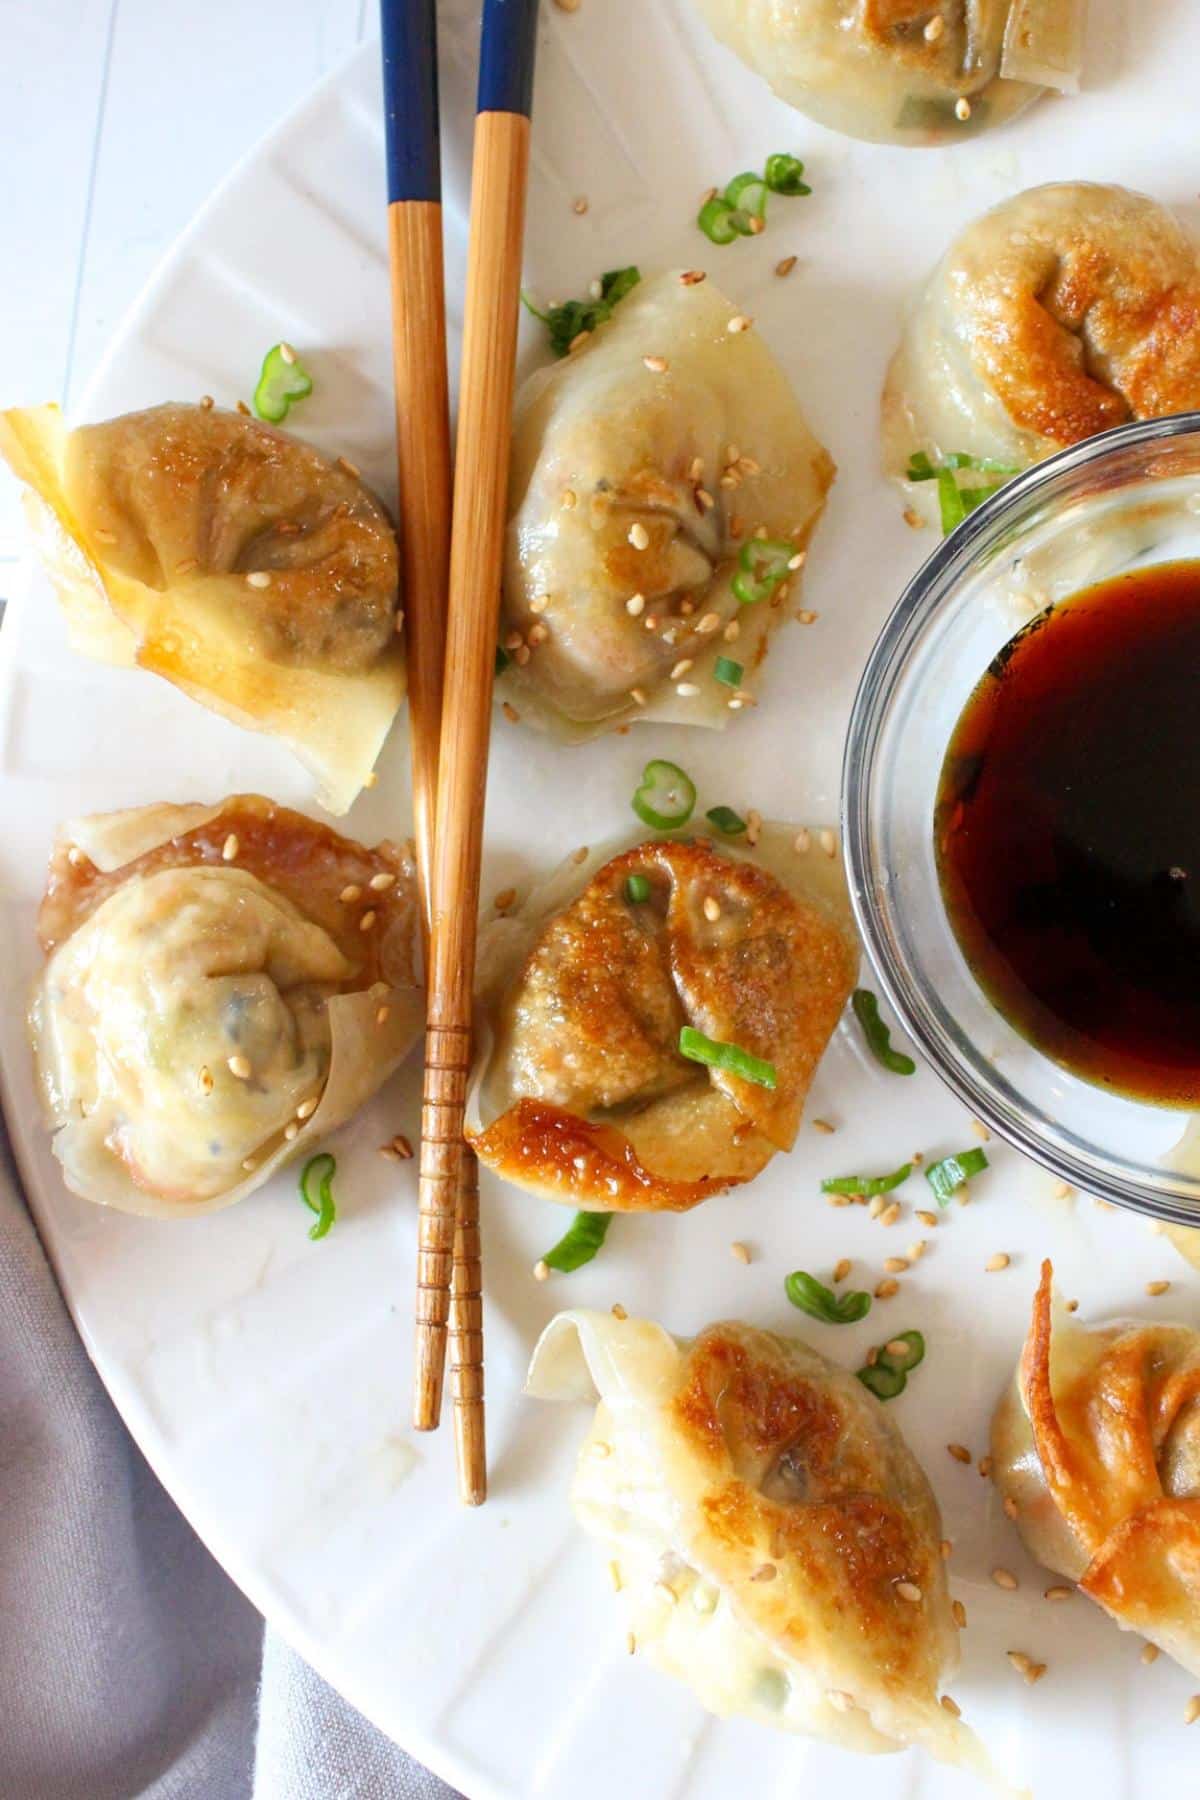 Plate full of vegan dumplings with chop sticks and soy sauce.